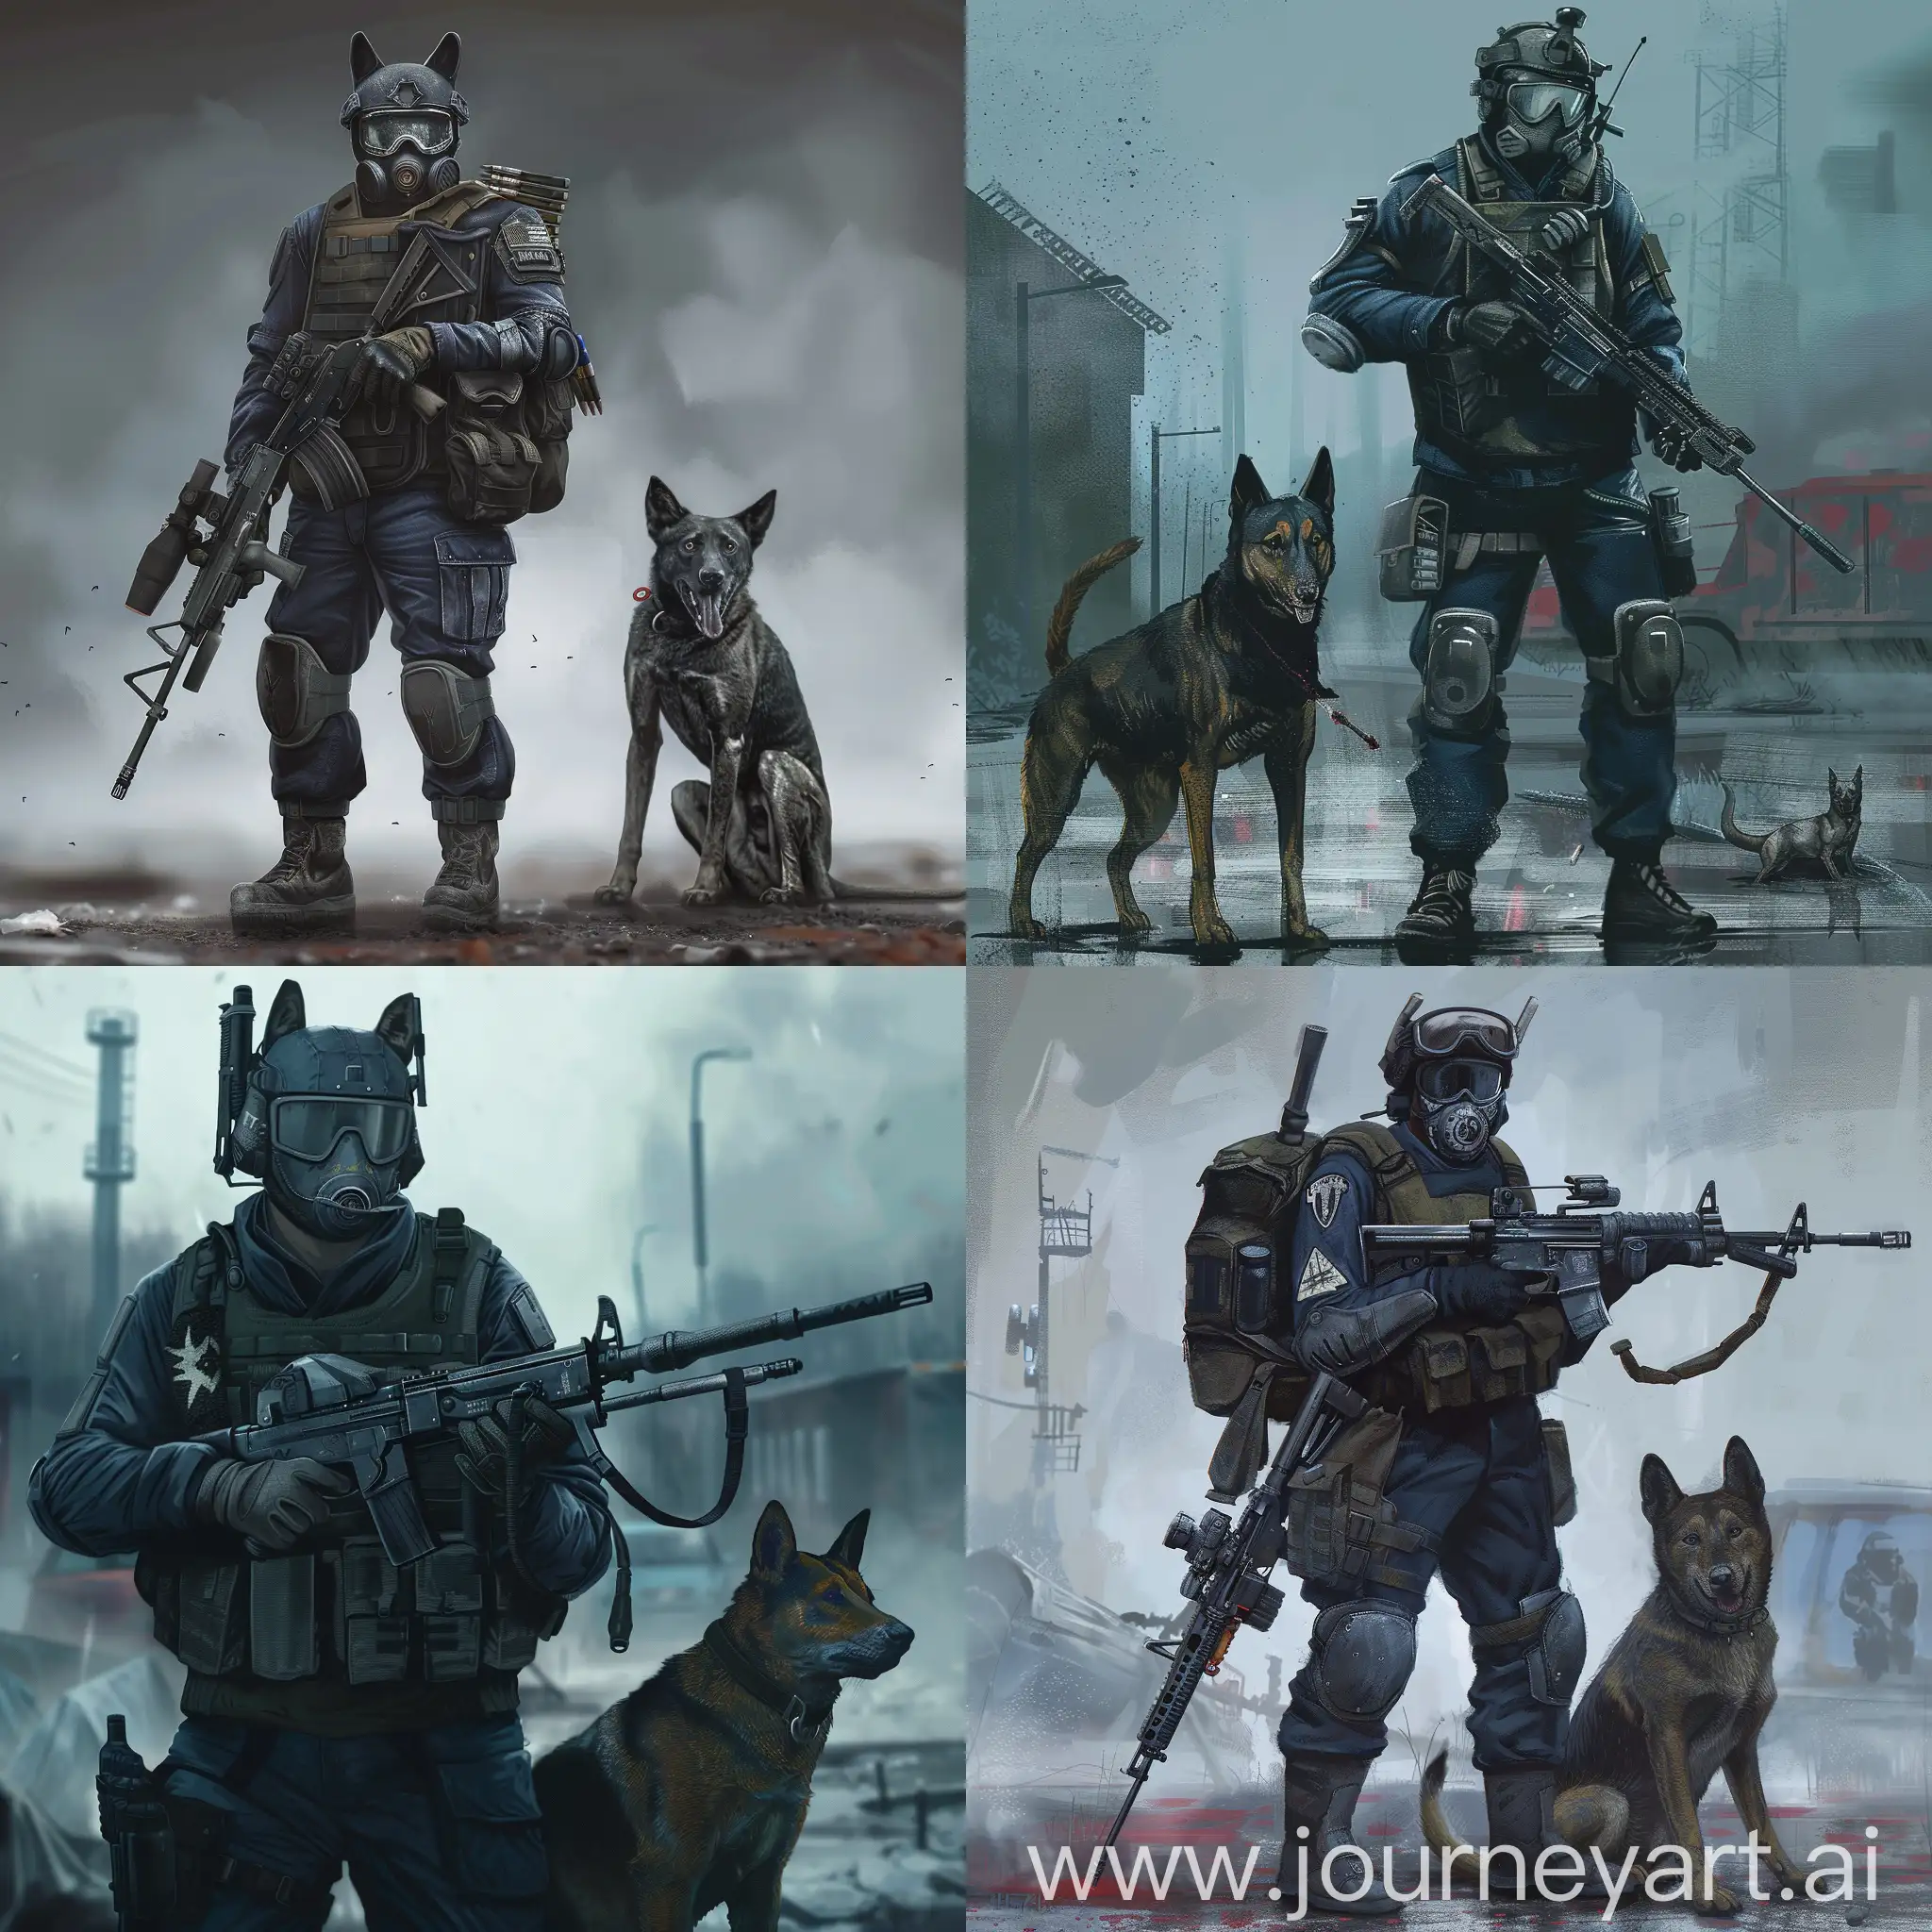 Mercenary-in-Gas-Mask-with-Sniper-Rifle-and-Mutant-Dog-in-Chernobyl-Zone